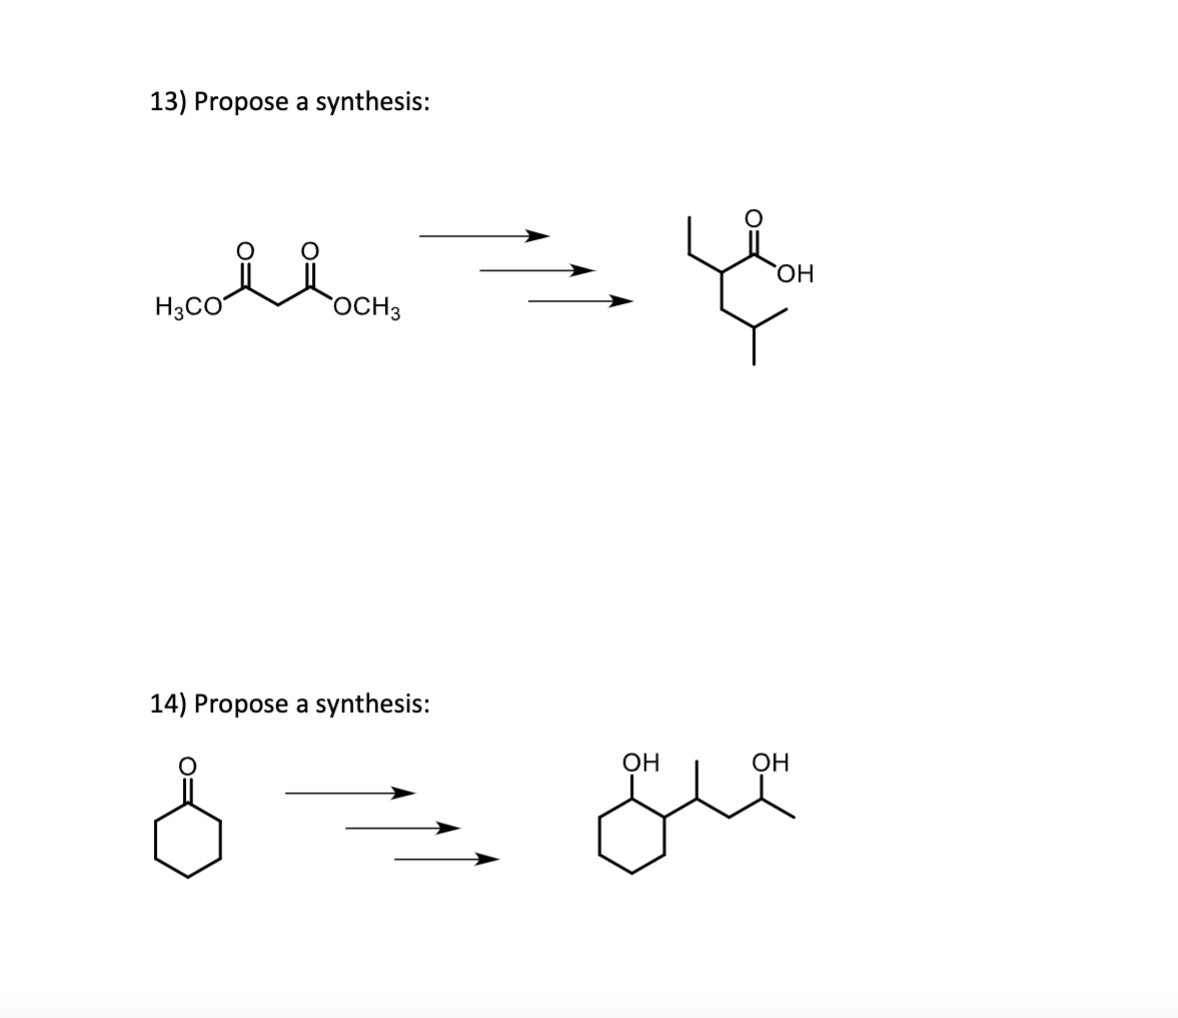 13) Propose a synthesis:
H3CO
`OCH3
14) Propose a synthesis:
OH
